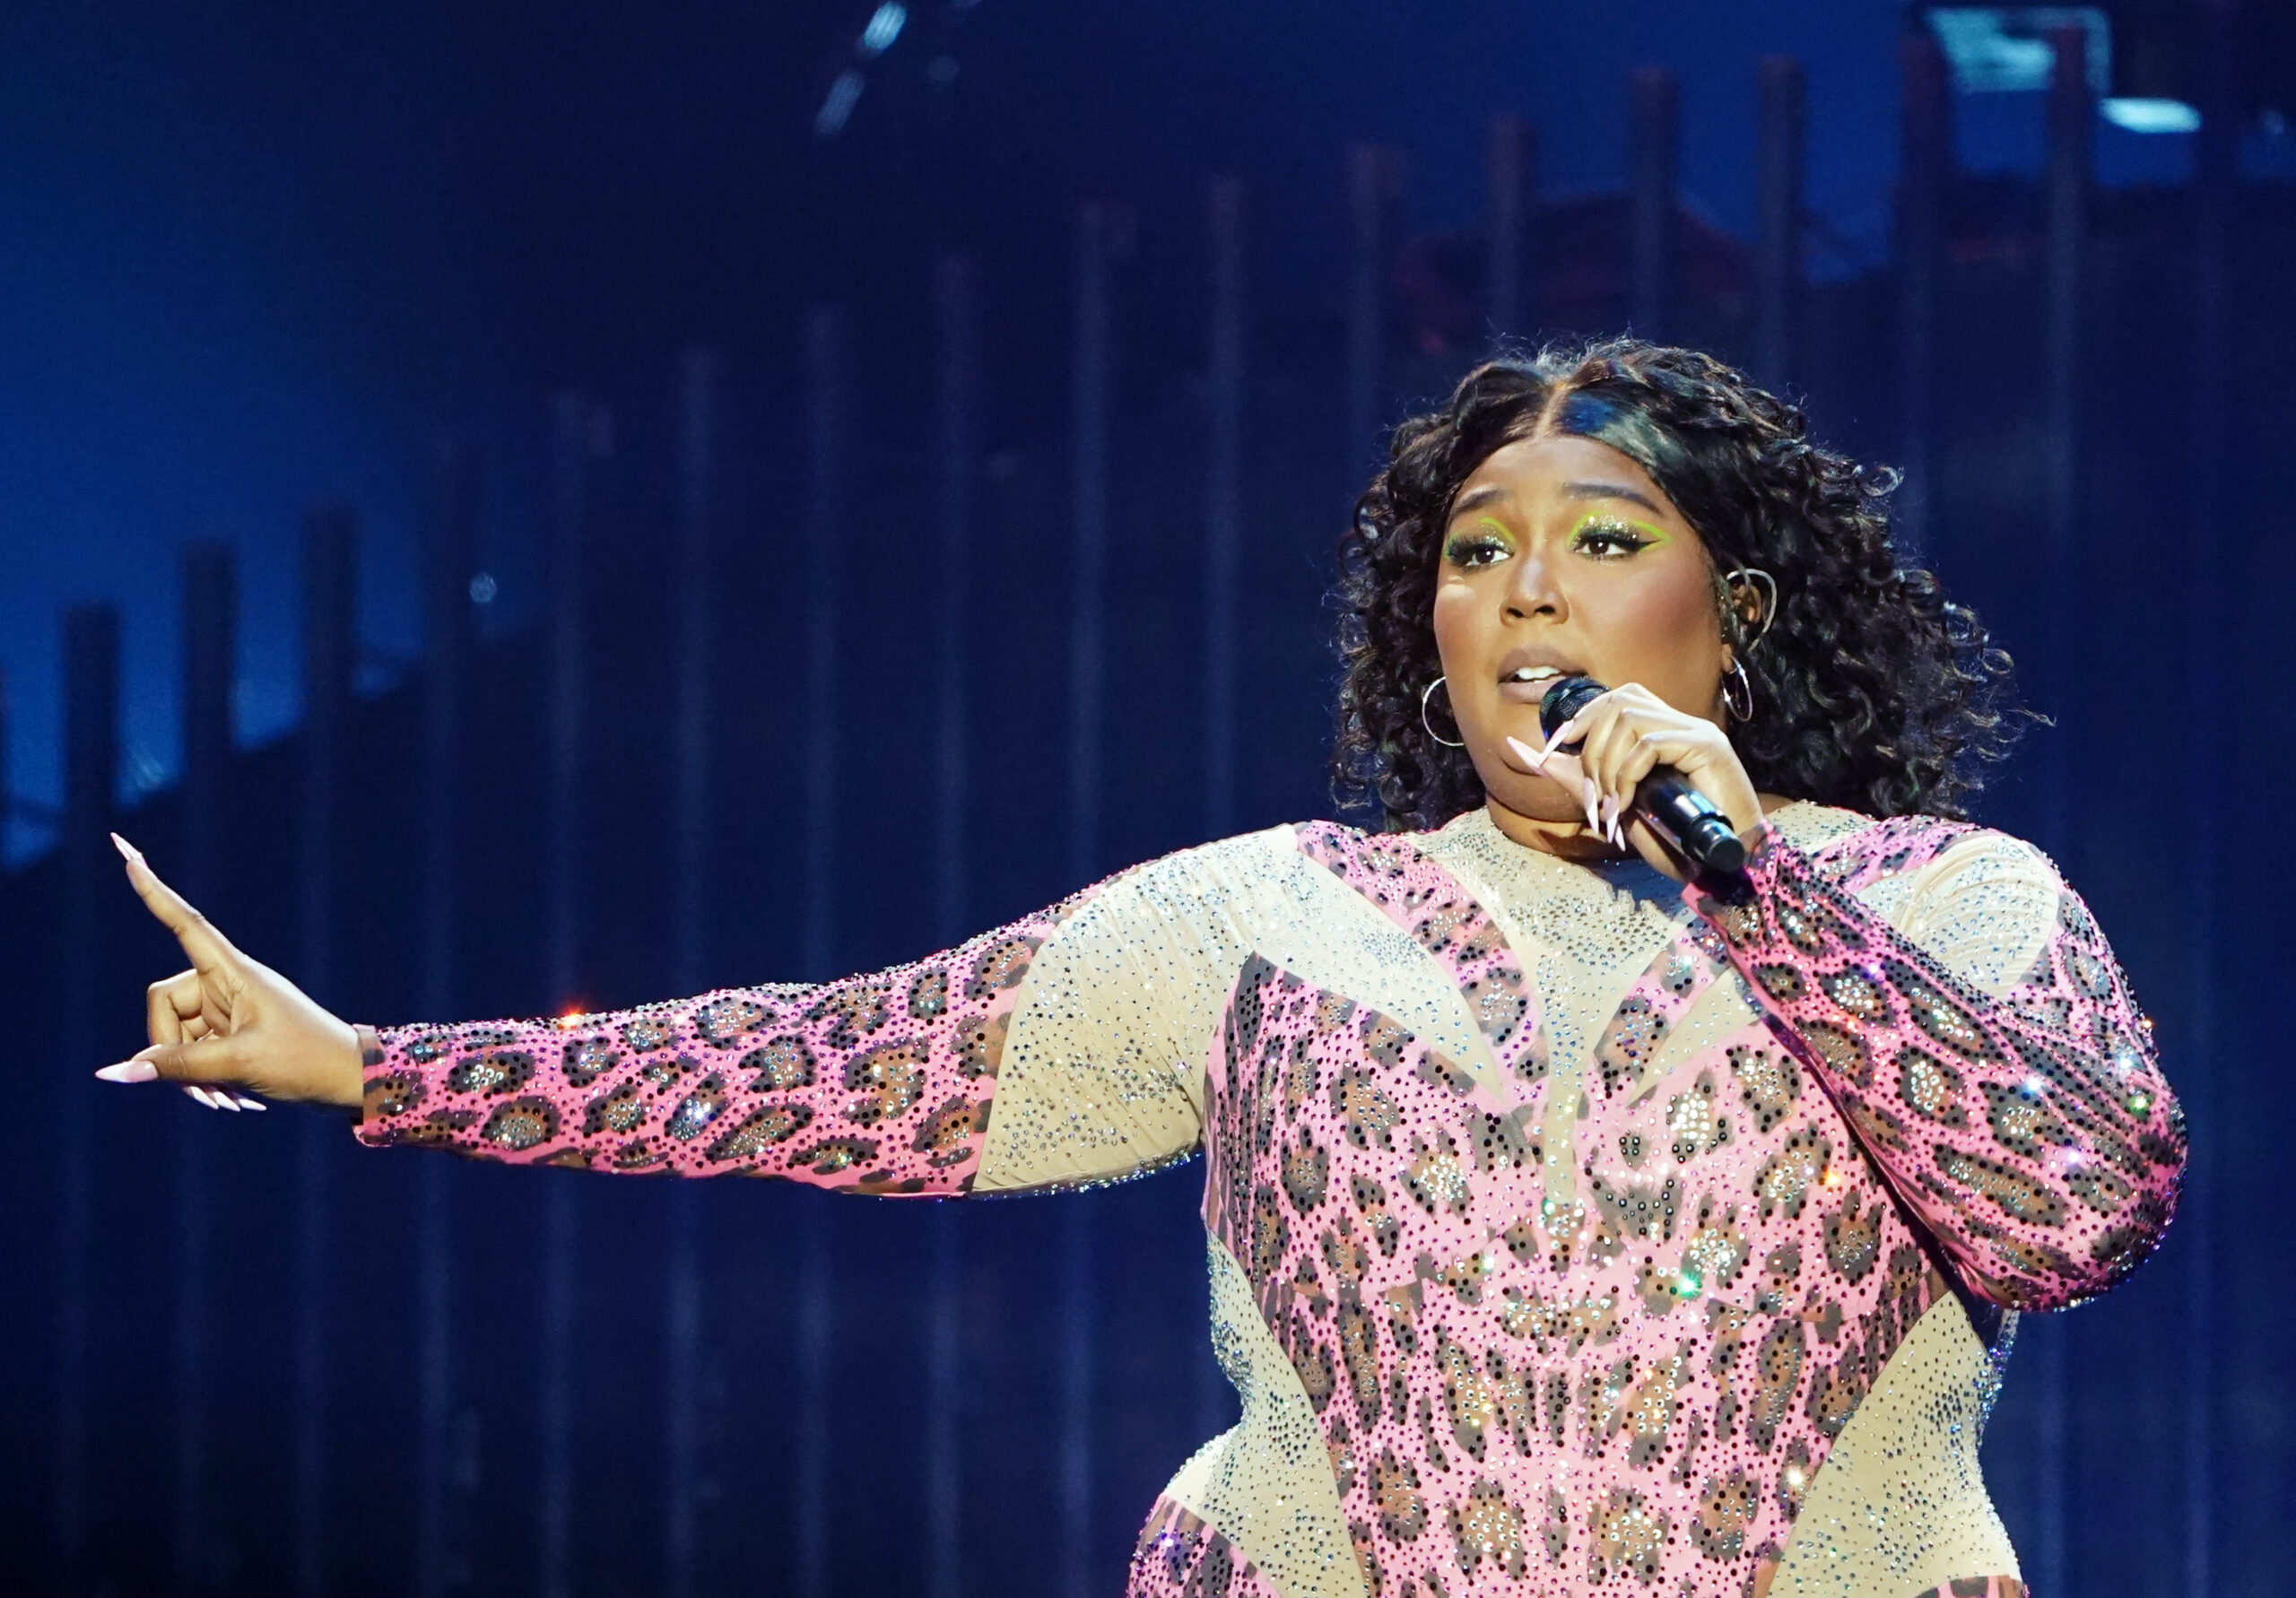 Lizzo brings the heat to Tennessee with a fierce concert featuring drag queens of all ages! But it’s not just about the music – she’s also taking a stand against a new state law that’s trying to censor “adult cabaret” performances in front of kids. This is one show you won’t want to miss!